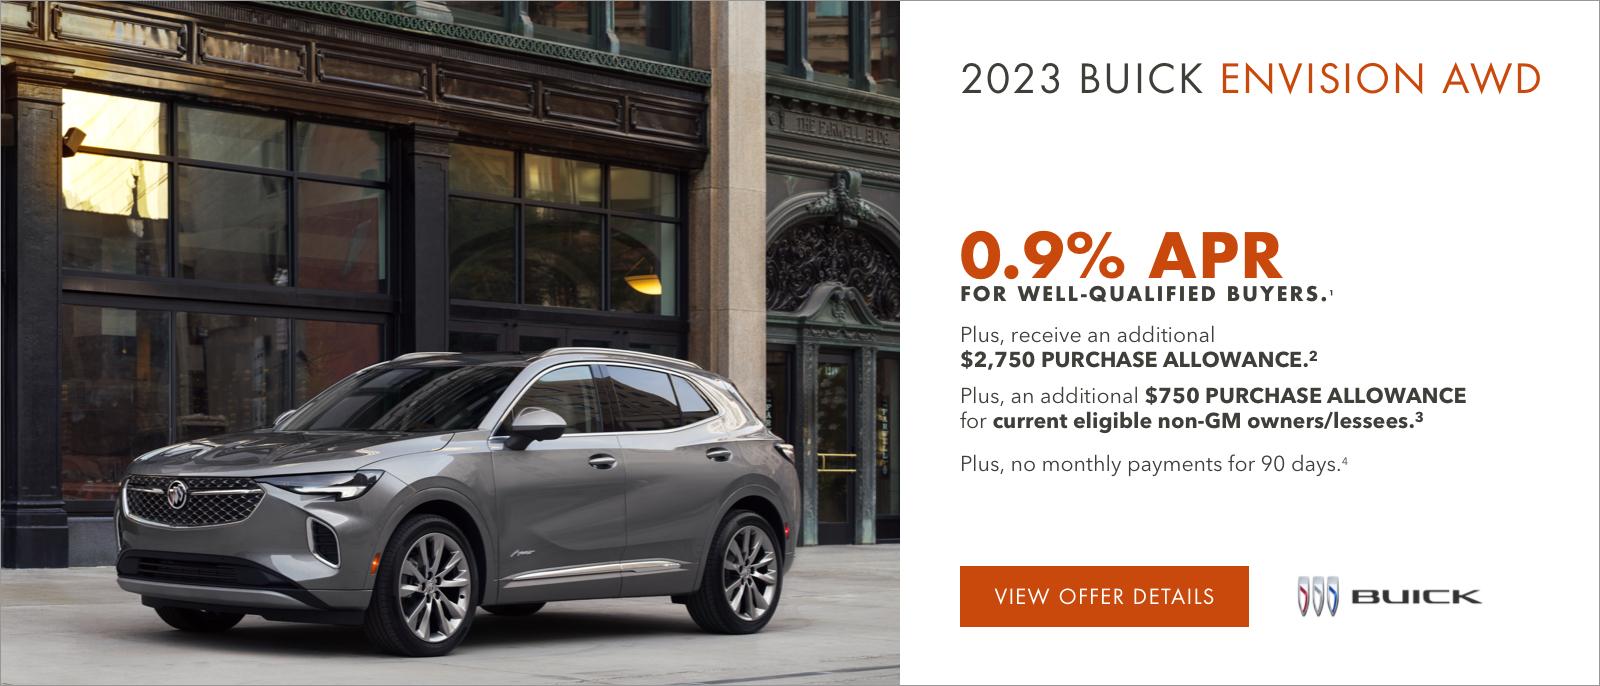 2023 Buick ENVISION AWD

0.9% APR 
FOR WELL-QUALIFIED BUYERS.1

Plus, receive an additional $2,750 PURCHASE ALLOWANCE.2

Plus, an additional $750 PURCHASE ALLOWANCE for current eligible non-GM owners/lessees.3

Plus, no monthly payments for 90 days.4